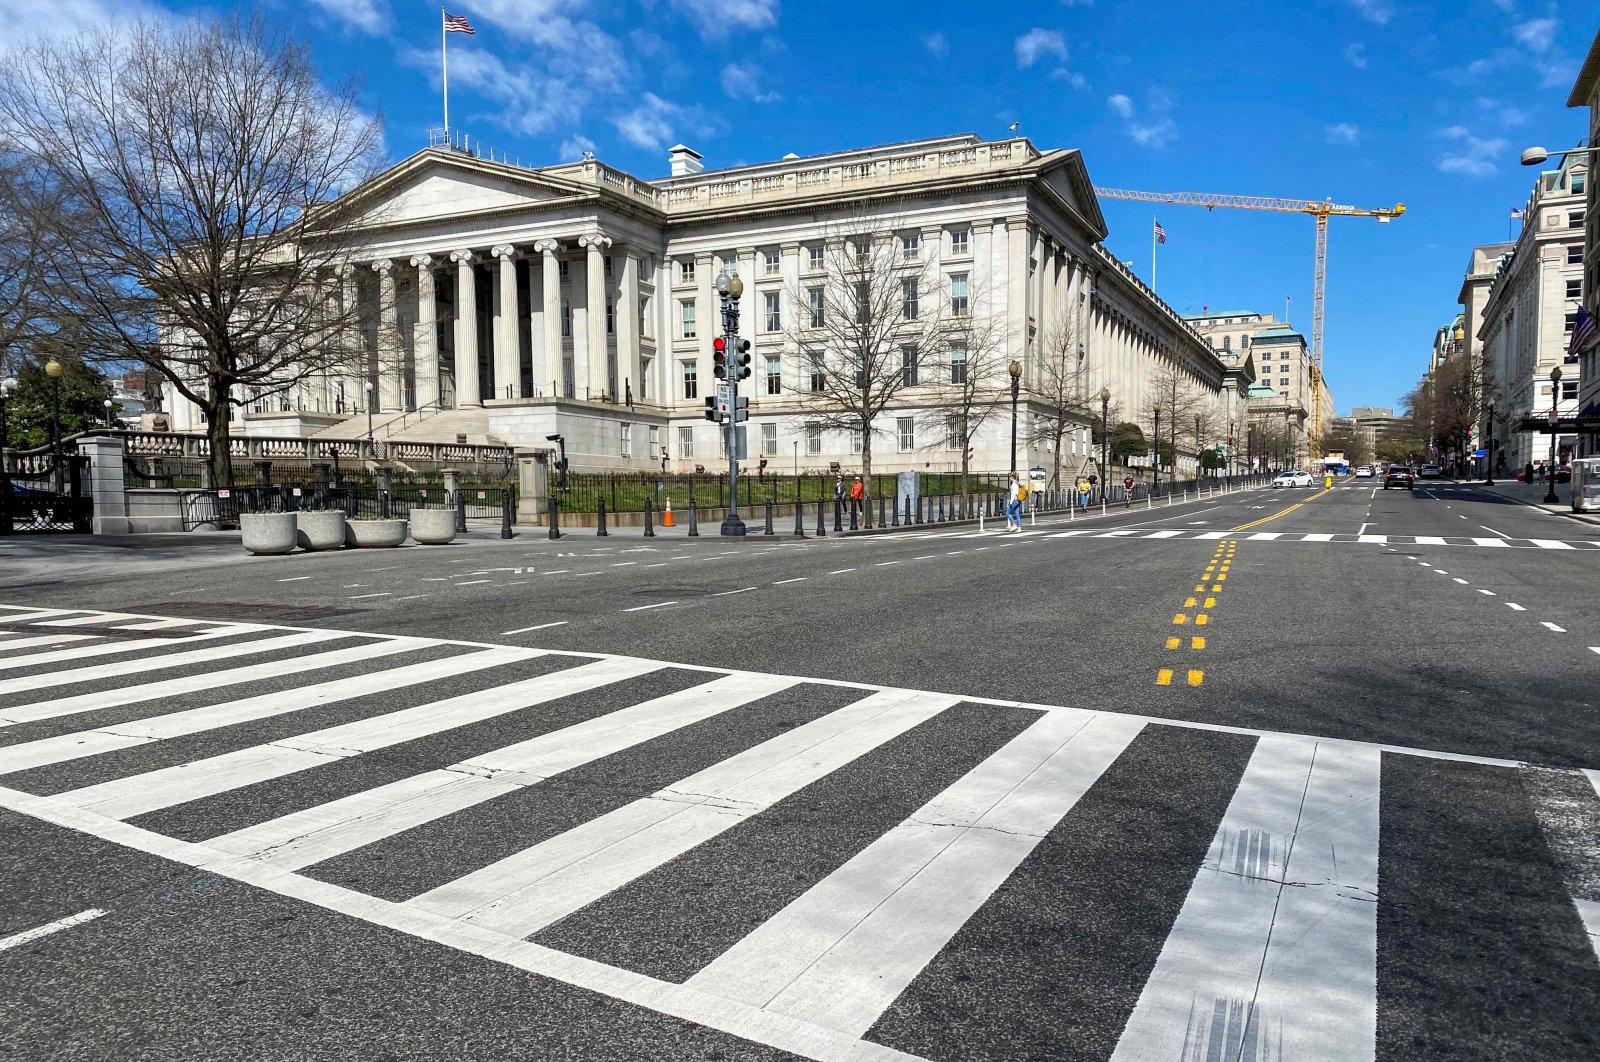 The U.S. Treasury Department building is seen next to an almost empty 15th Street at noon in Washington, March 13, 2020. (AFP Photo)